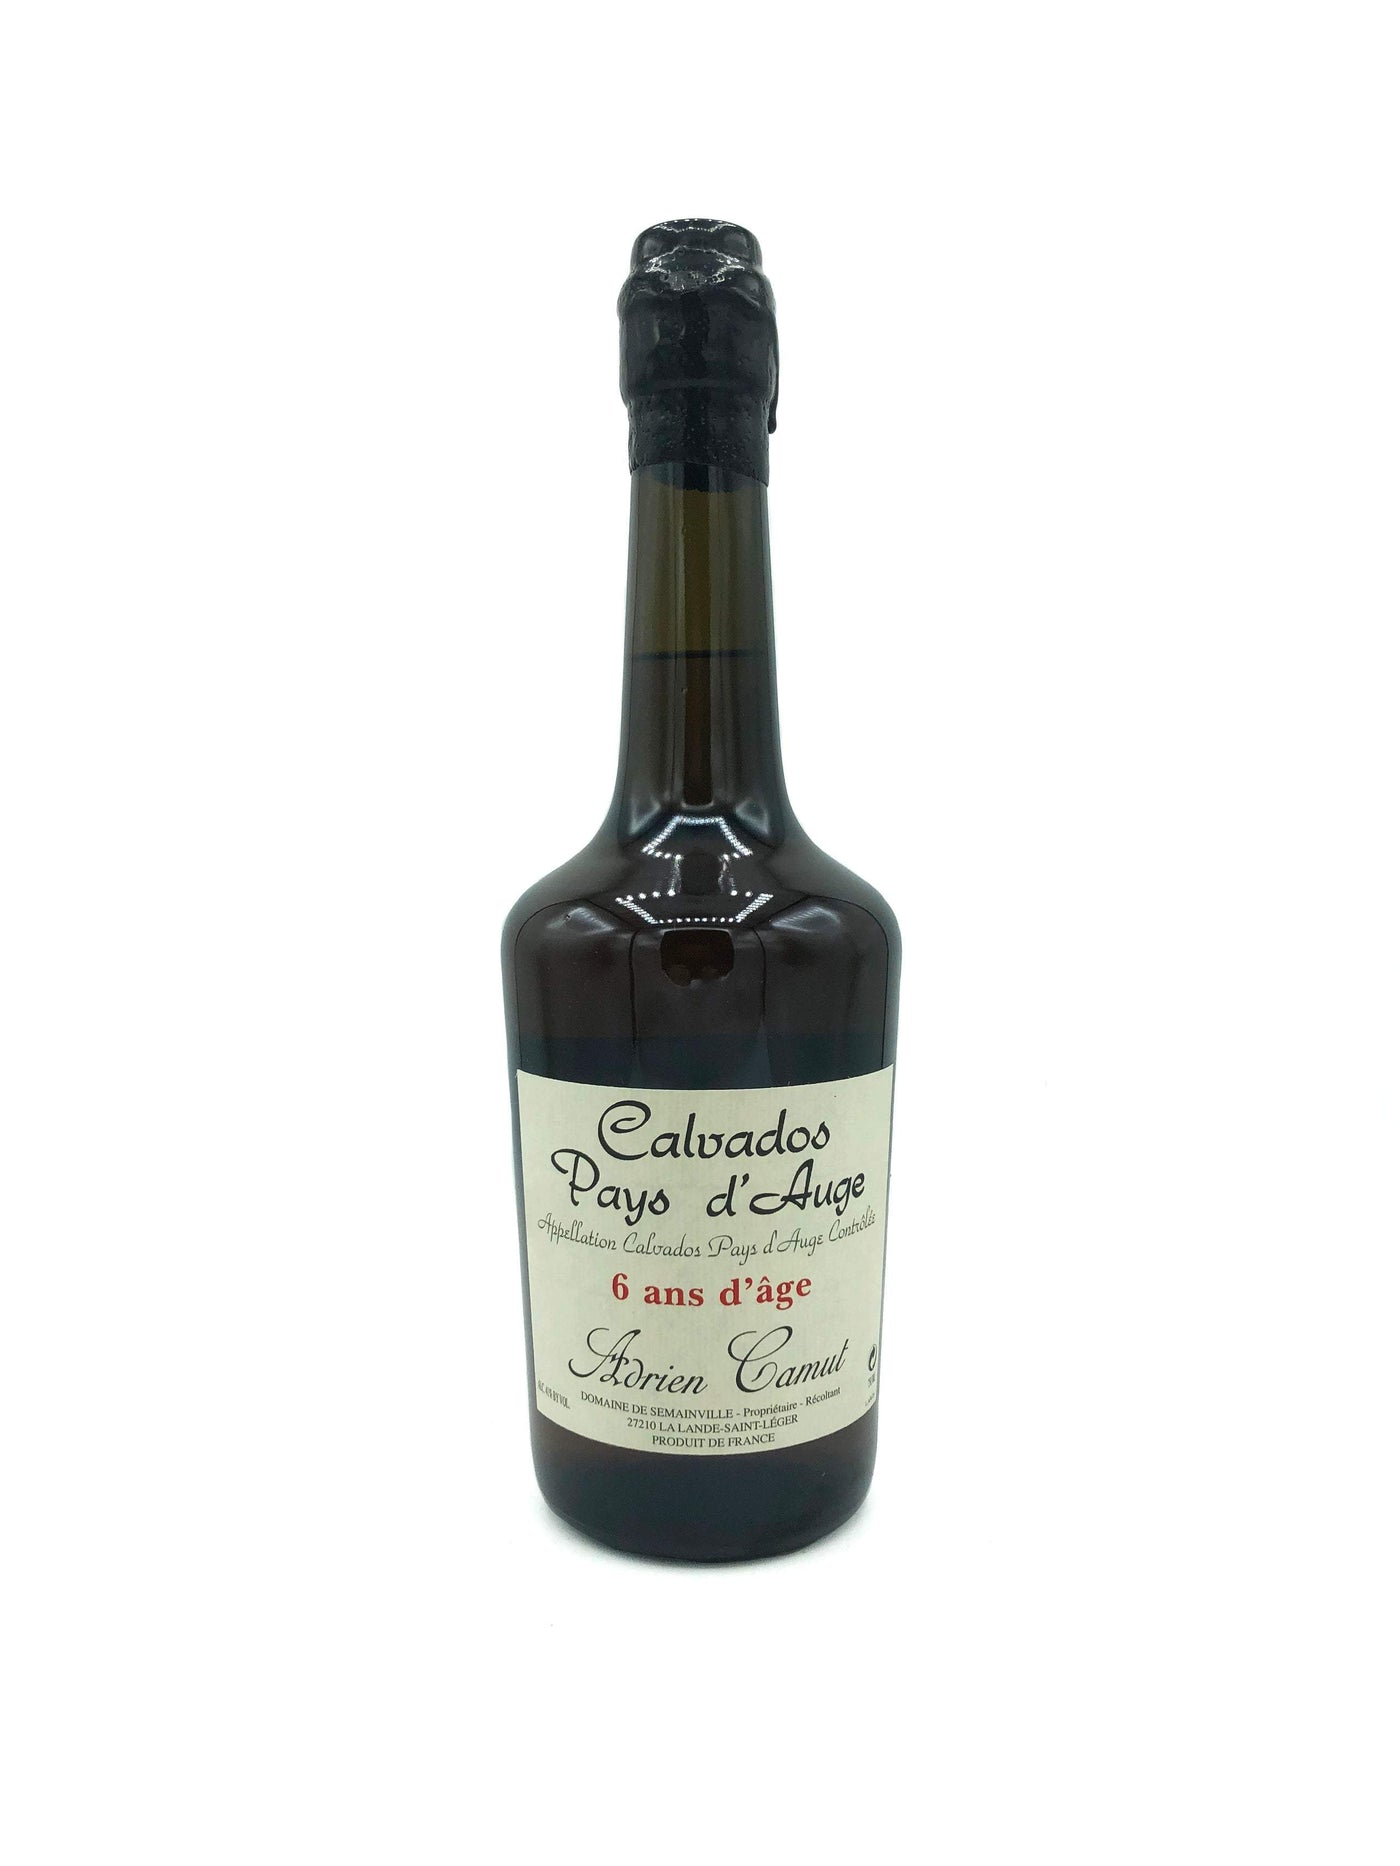 Adrien Camut Calvados 6yr Old Pays d'Auge 750ml